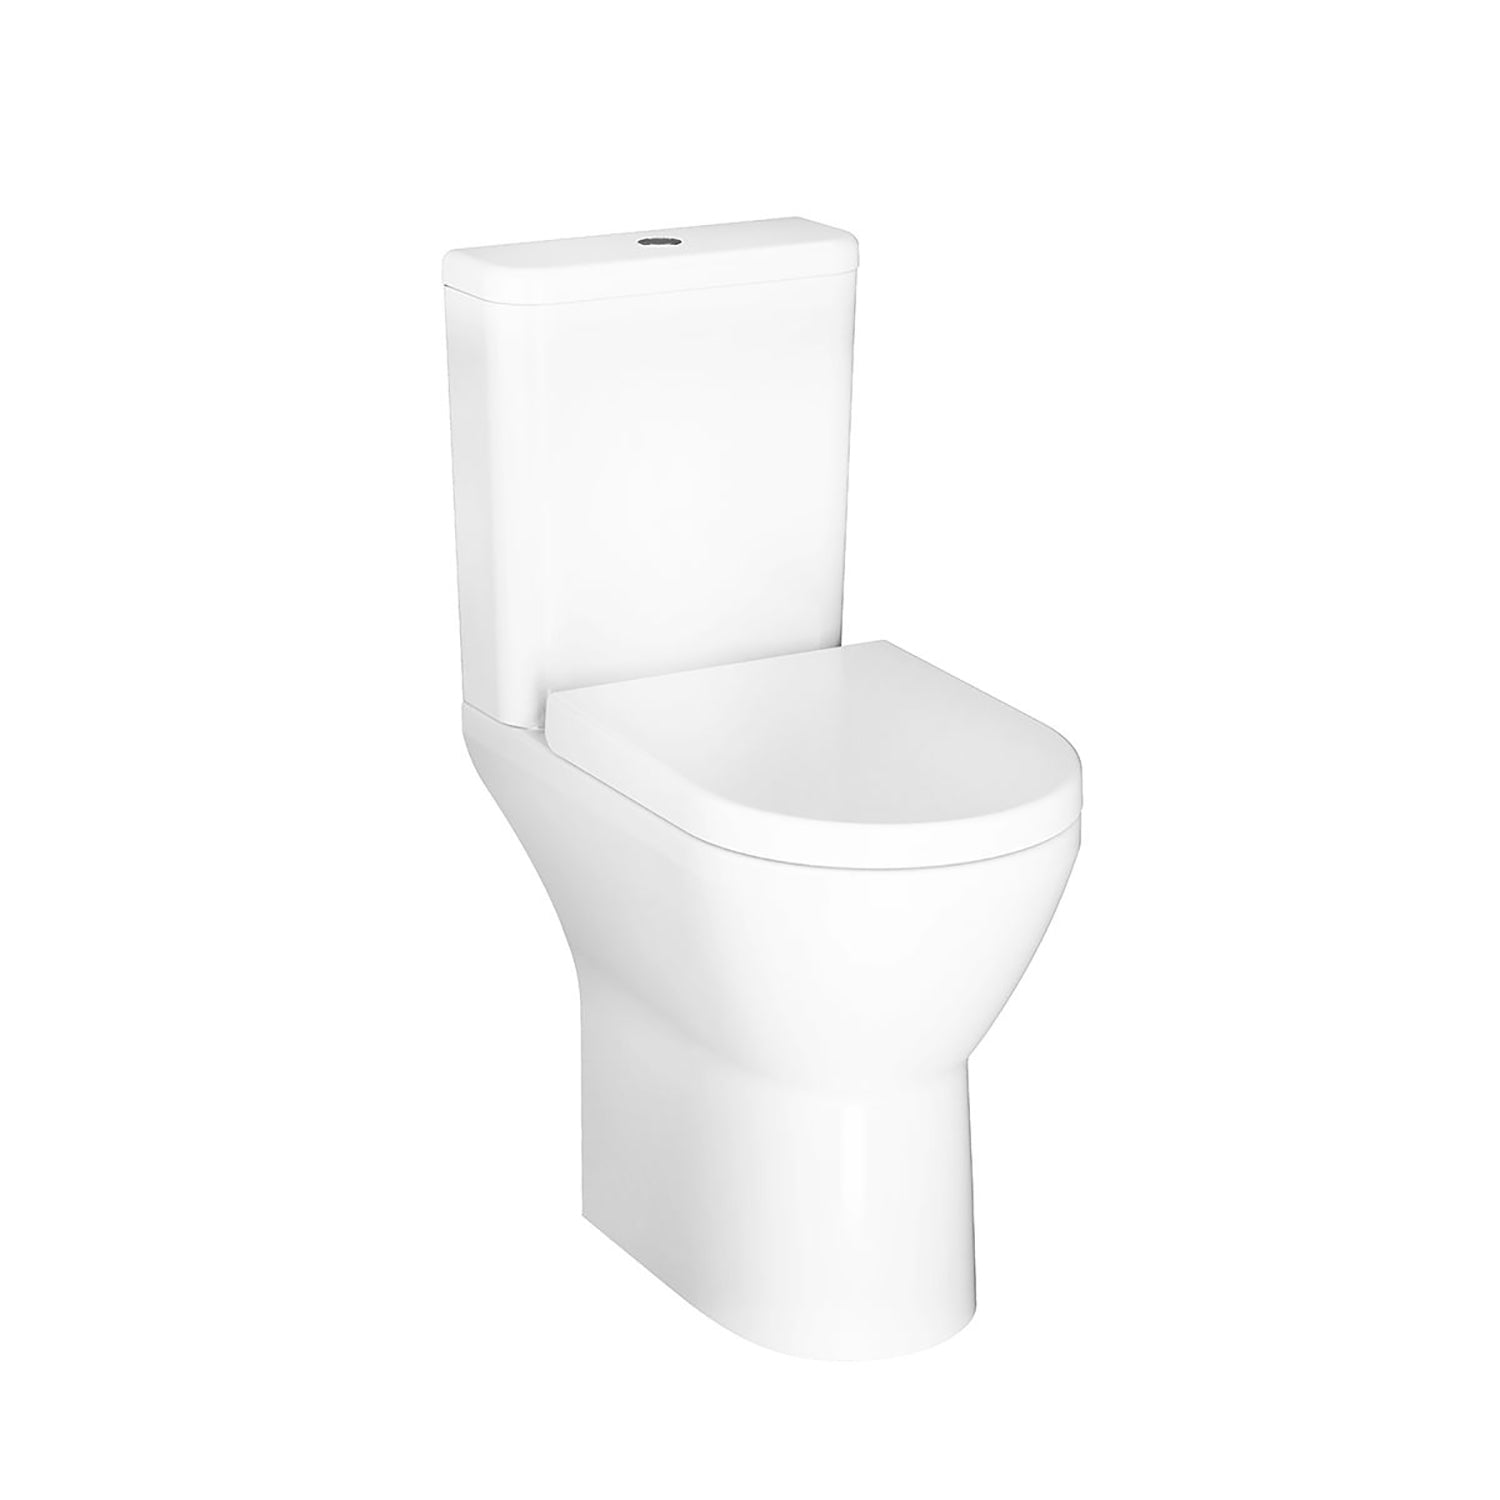 Vesta comfort height close coupled toilet in a white finish, 500mm with seat, cover and cistern not included on a white background.